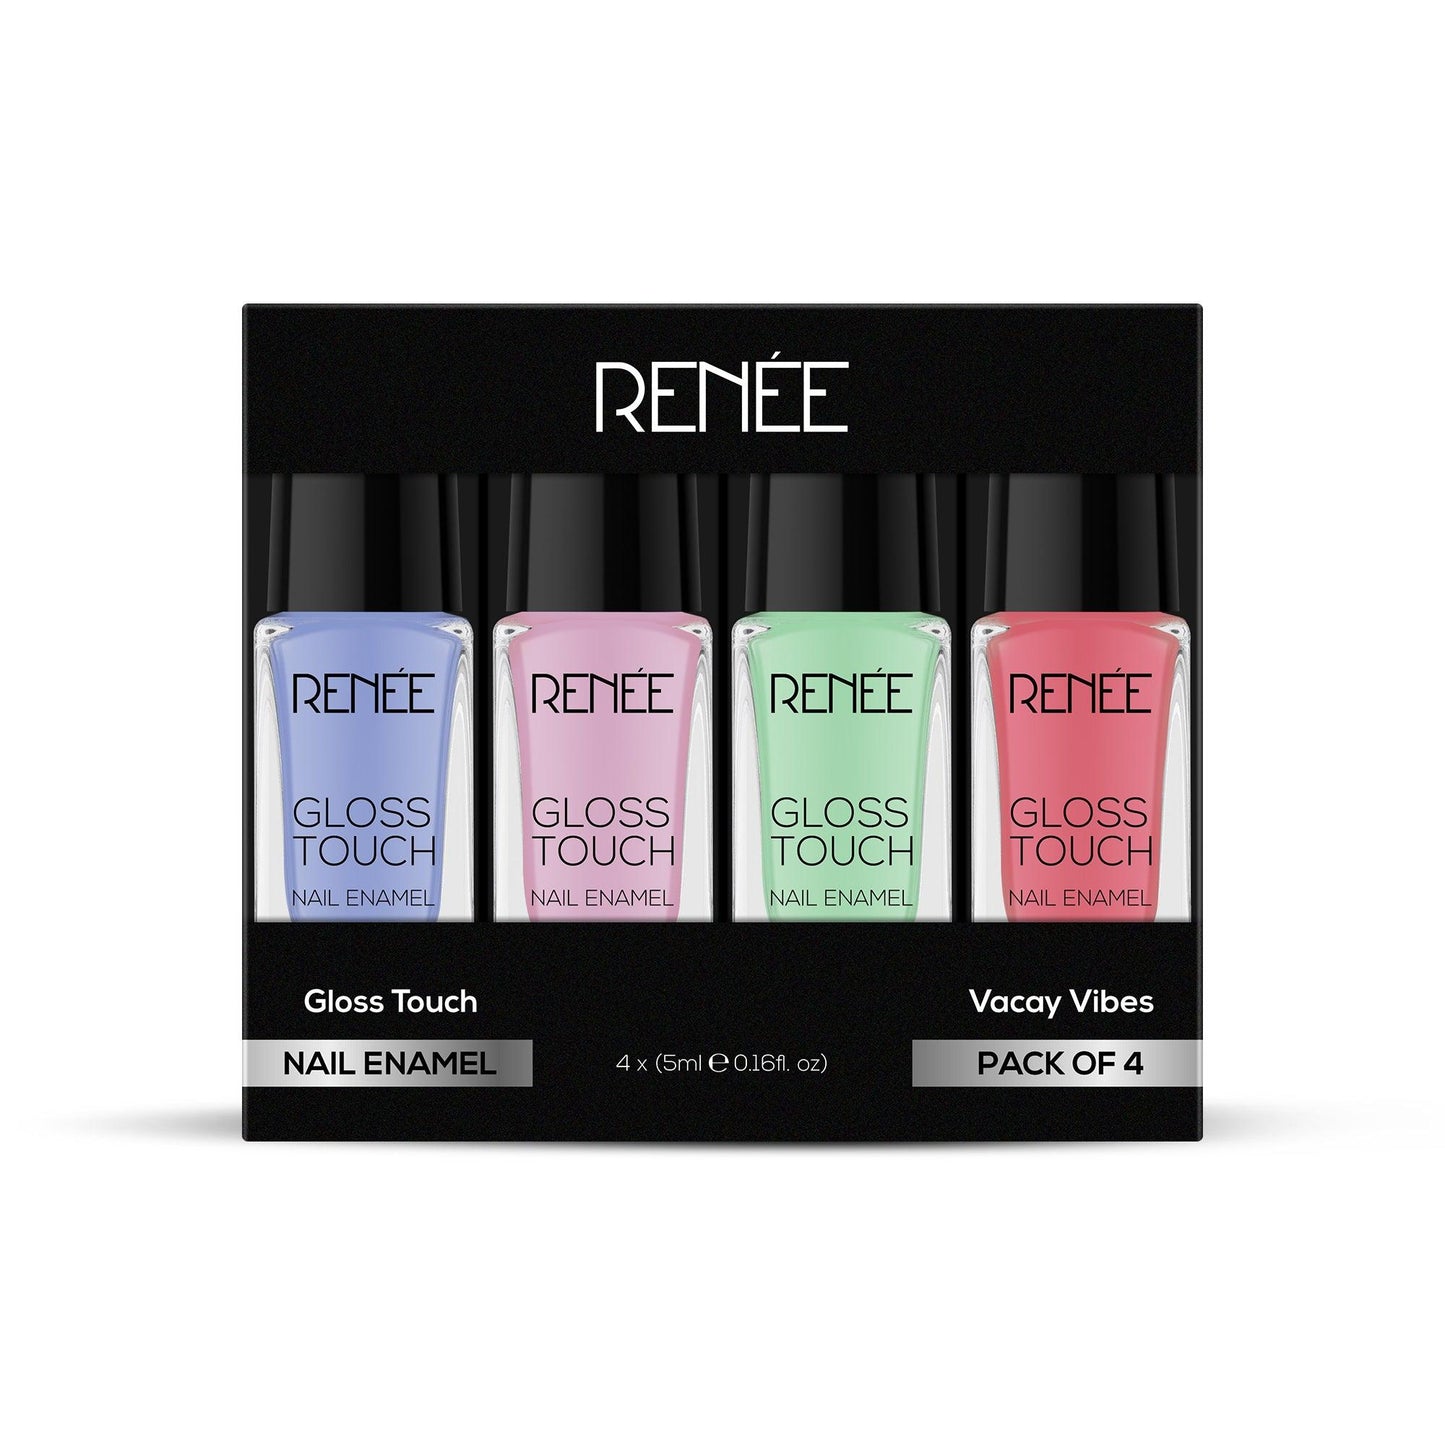 Renee Gloss Touch Set Of 4 Nail Enamels, 5ml Each - N04 Vacay Vibes